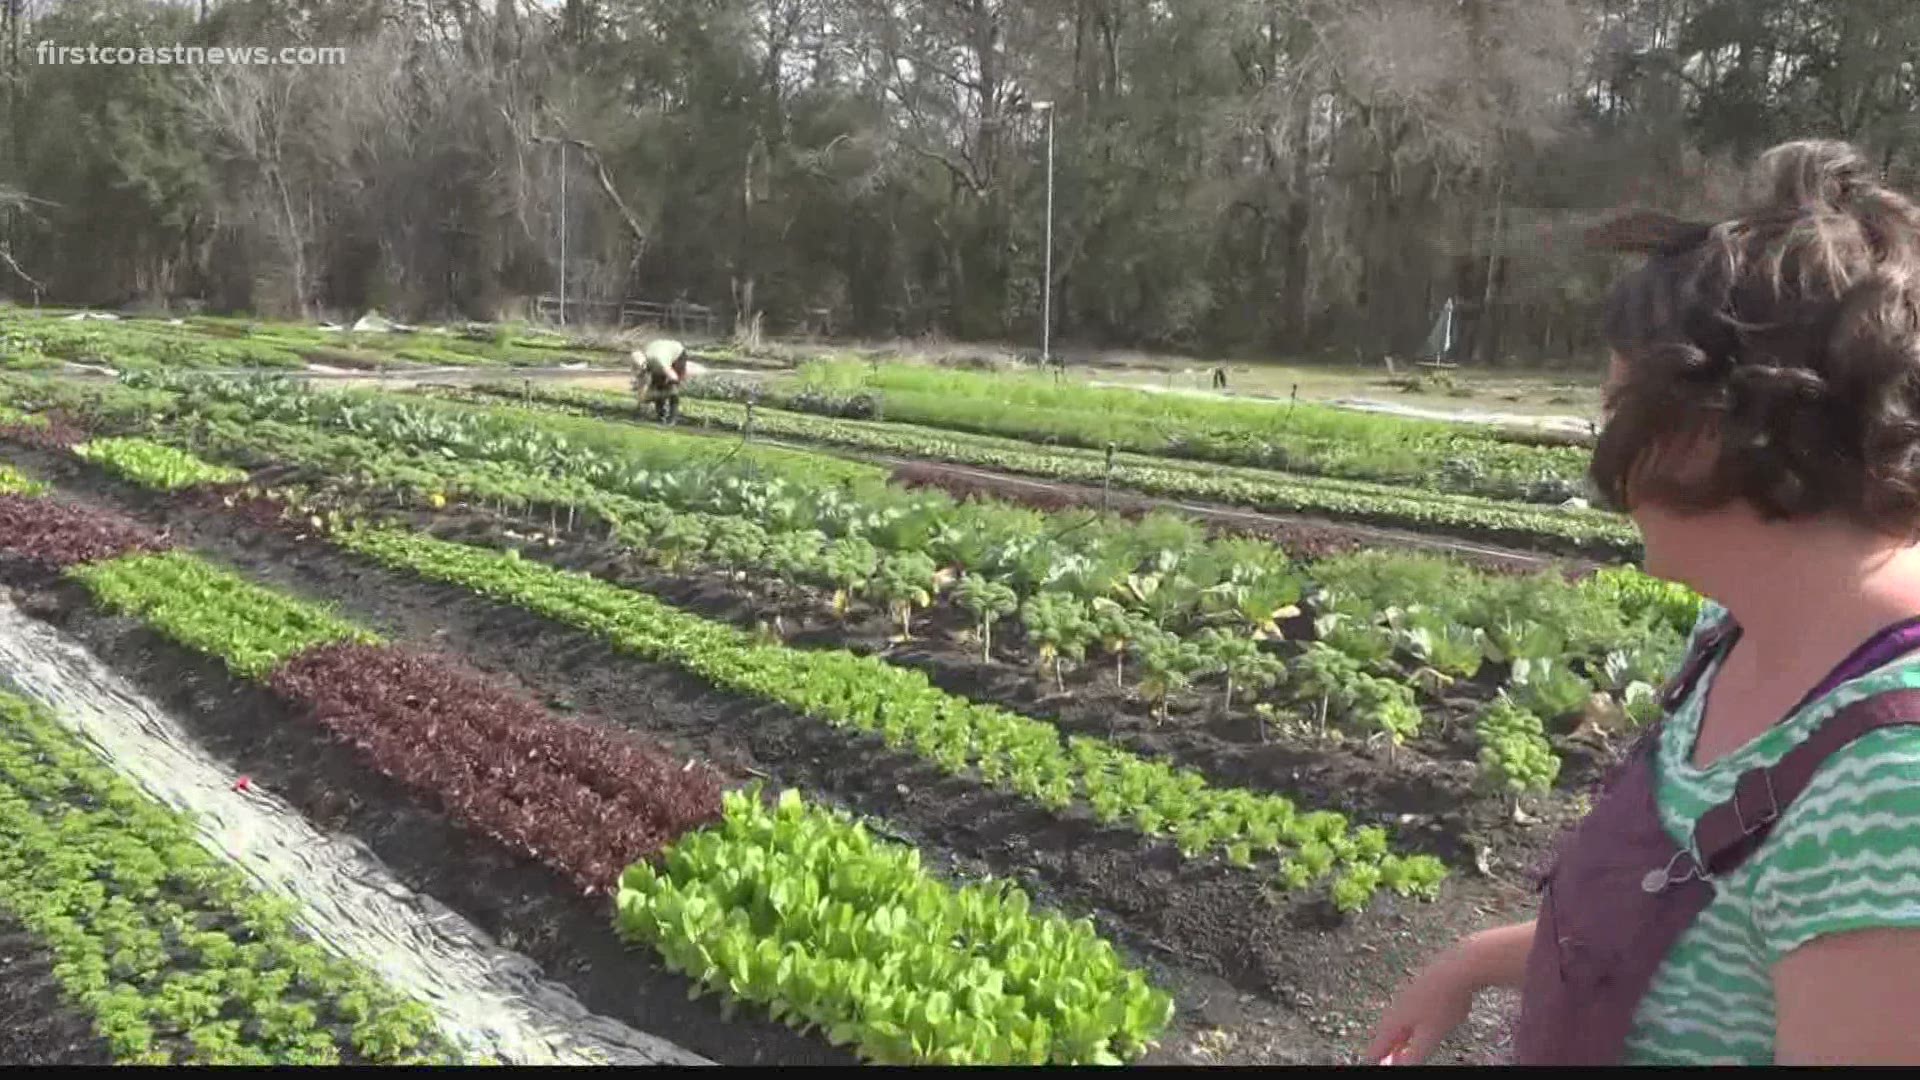 "We need to really recognize the need for food to be produced locally because we can't always depend on the national supply chains," said Juicy Roots Farm's owner.